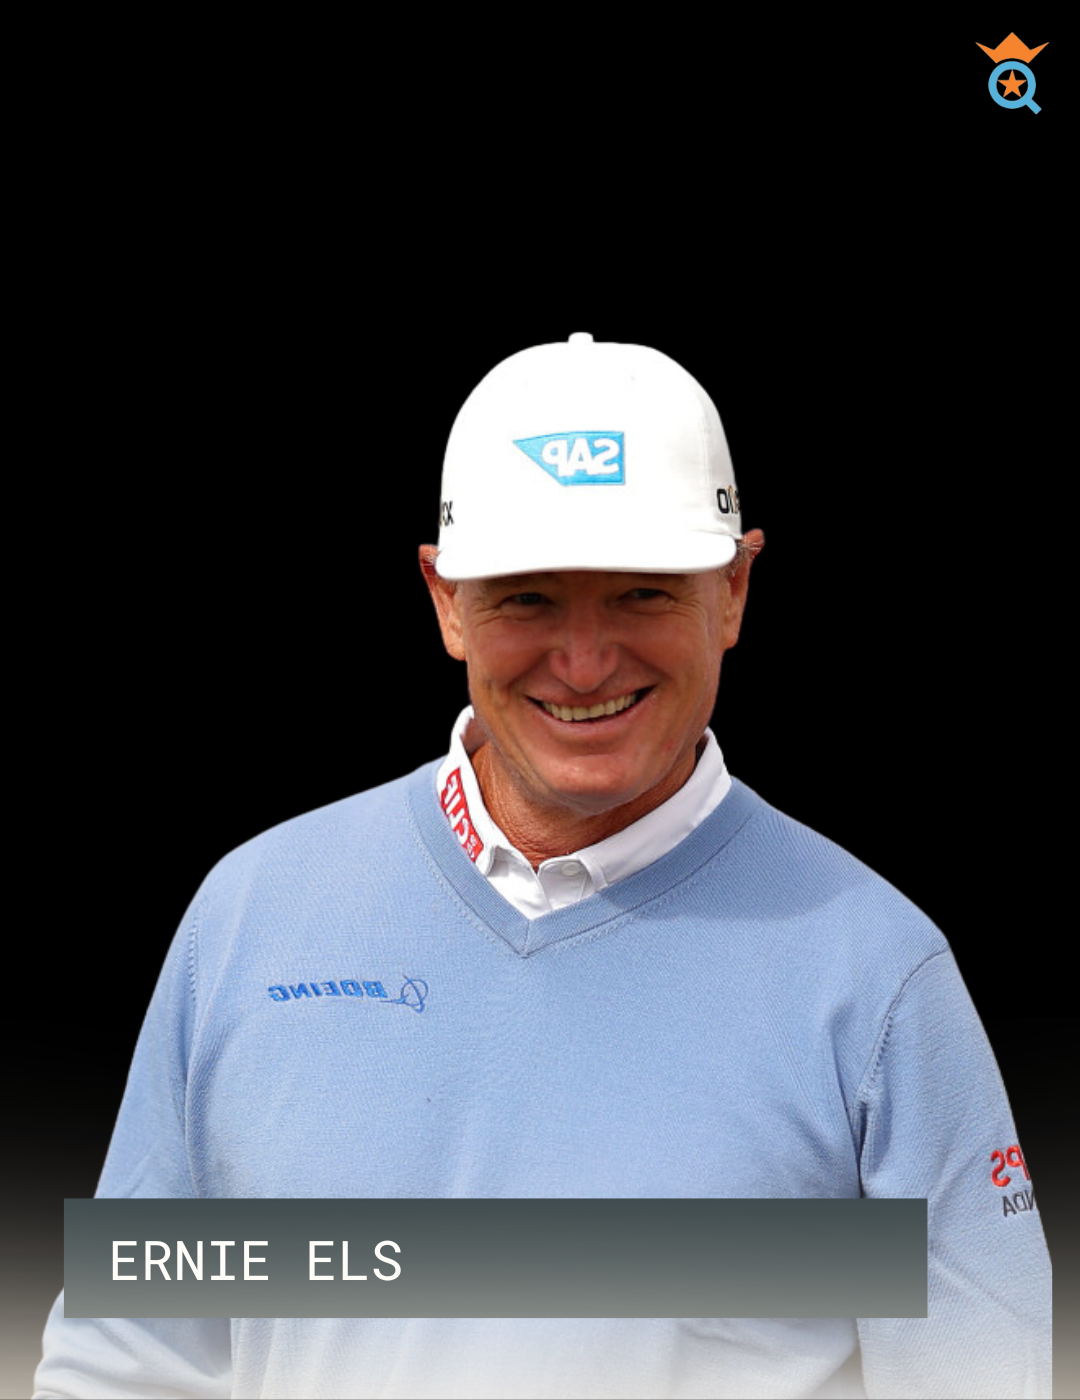 Best Golf Players of All Time, Ernie Els